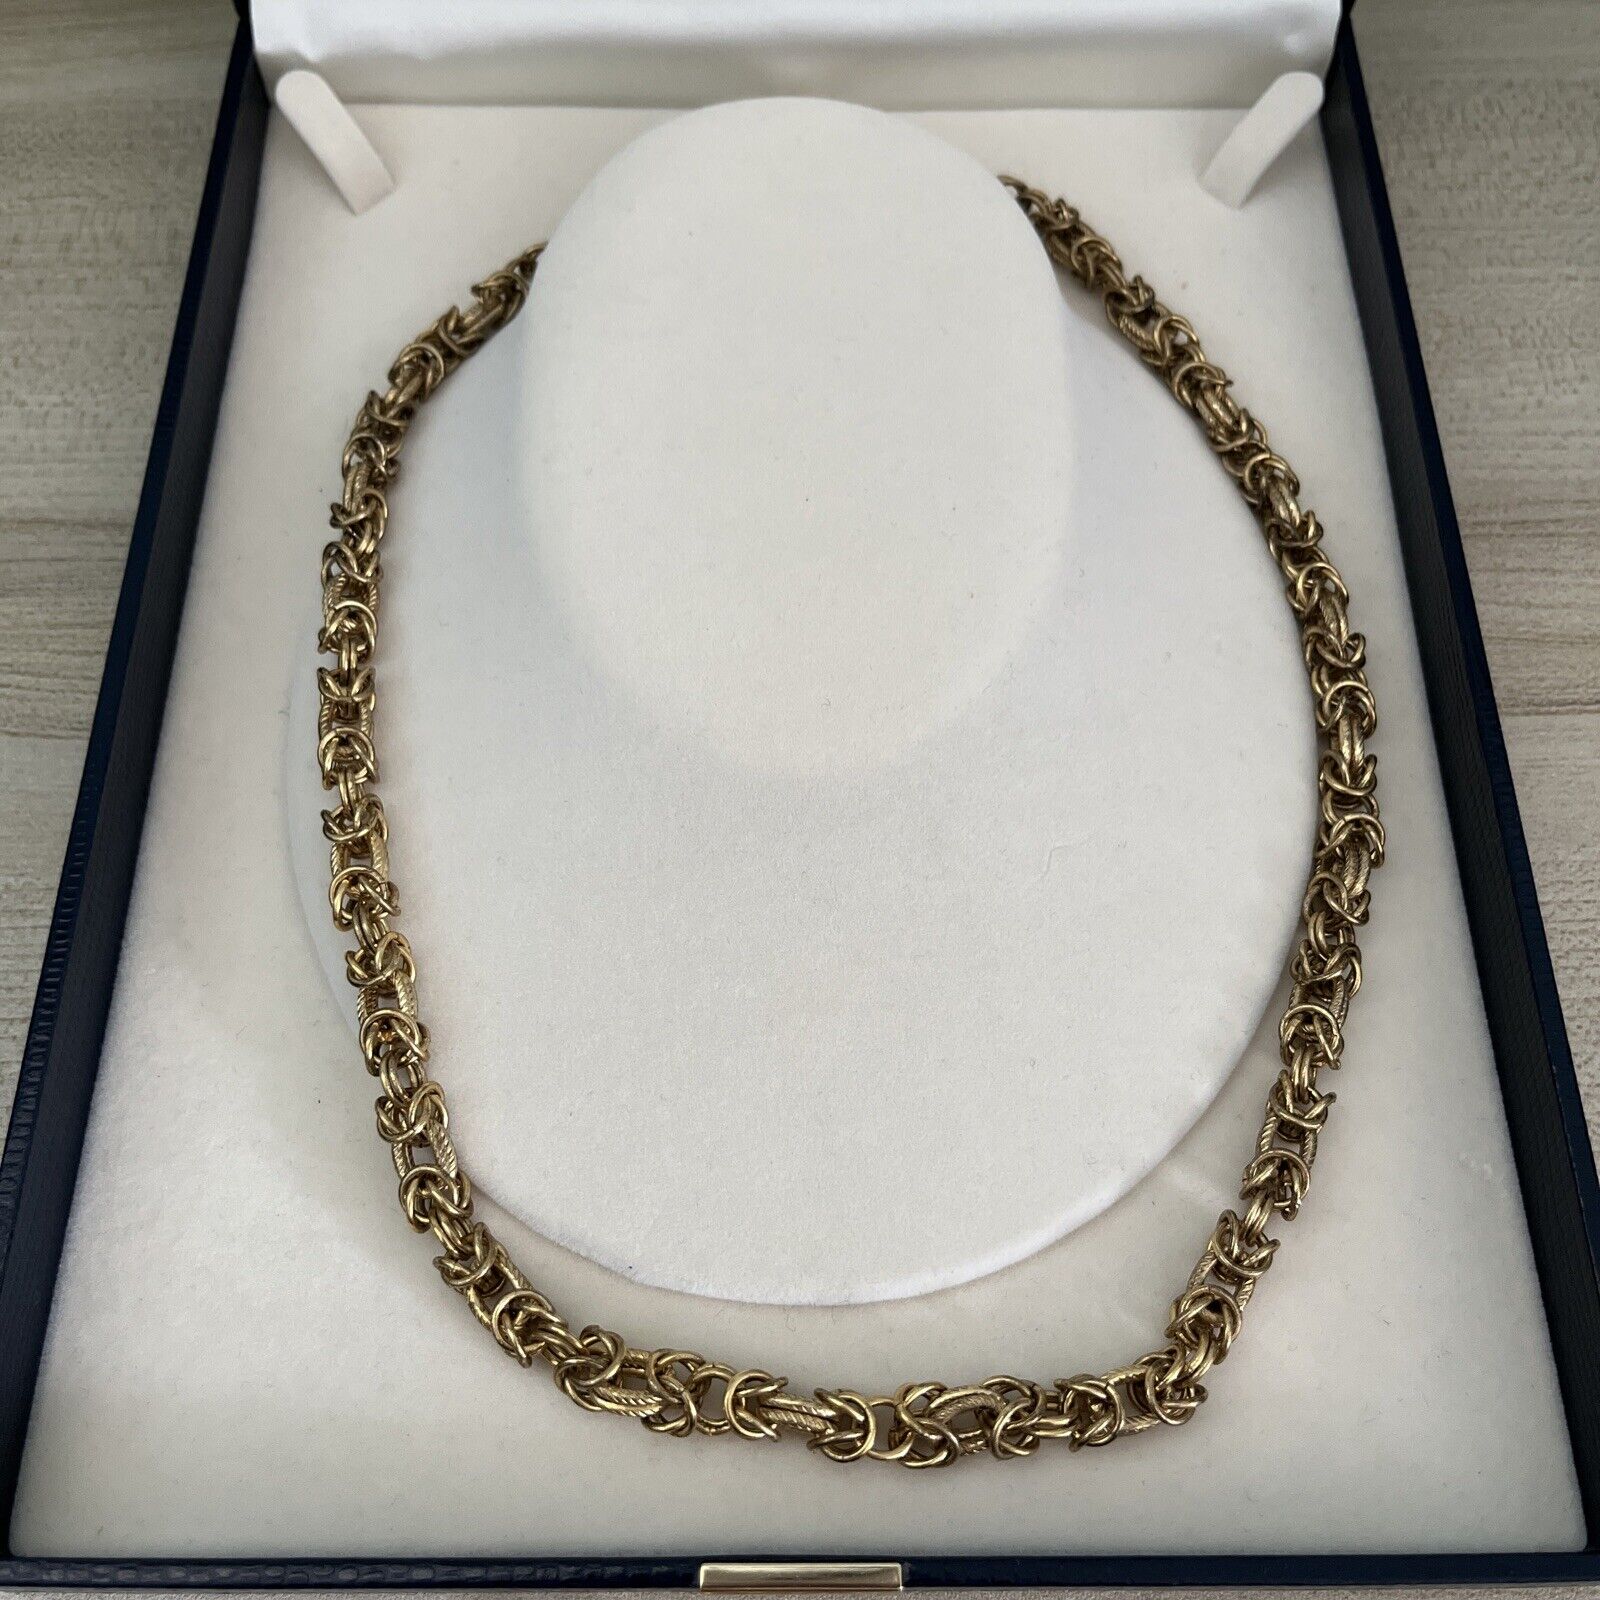 Vintage Signed Miriam Haskell Necklace Waterfall Chain